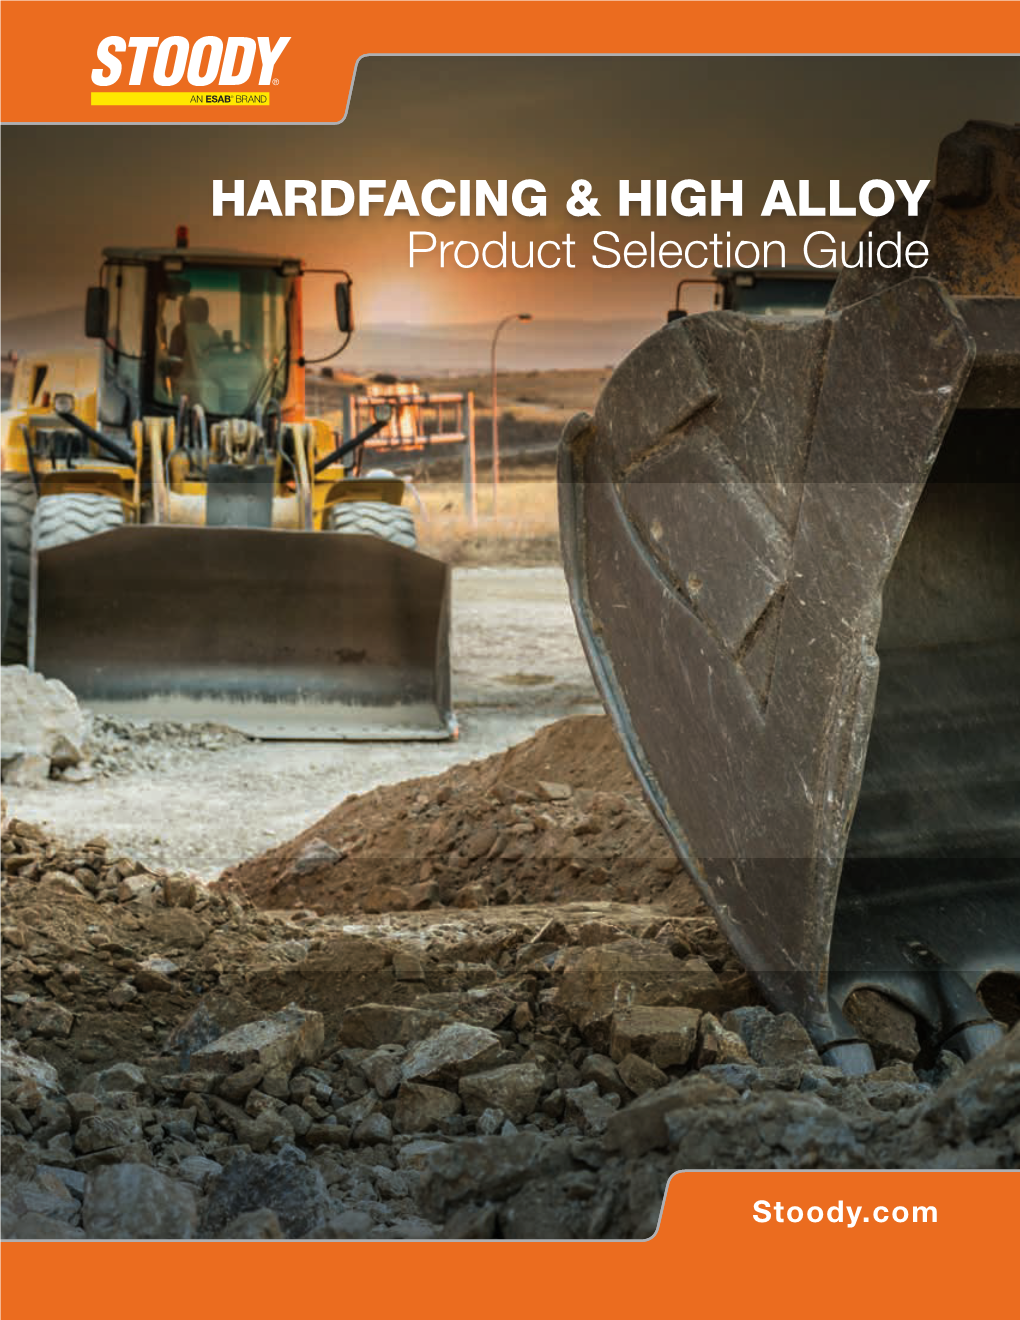 HARDFACING & HIGH ALLOY Product Selection Guide